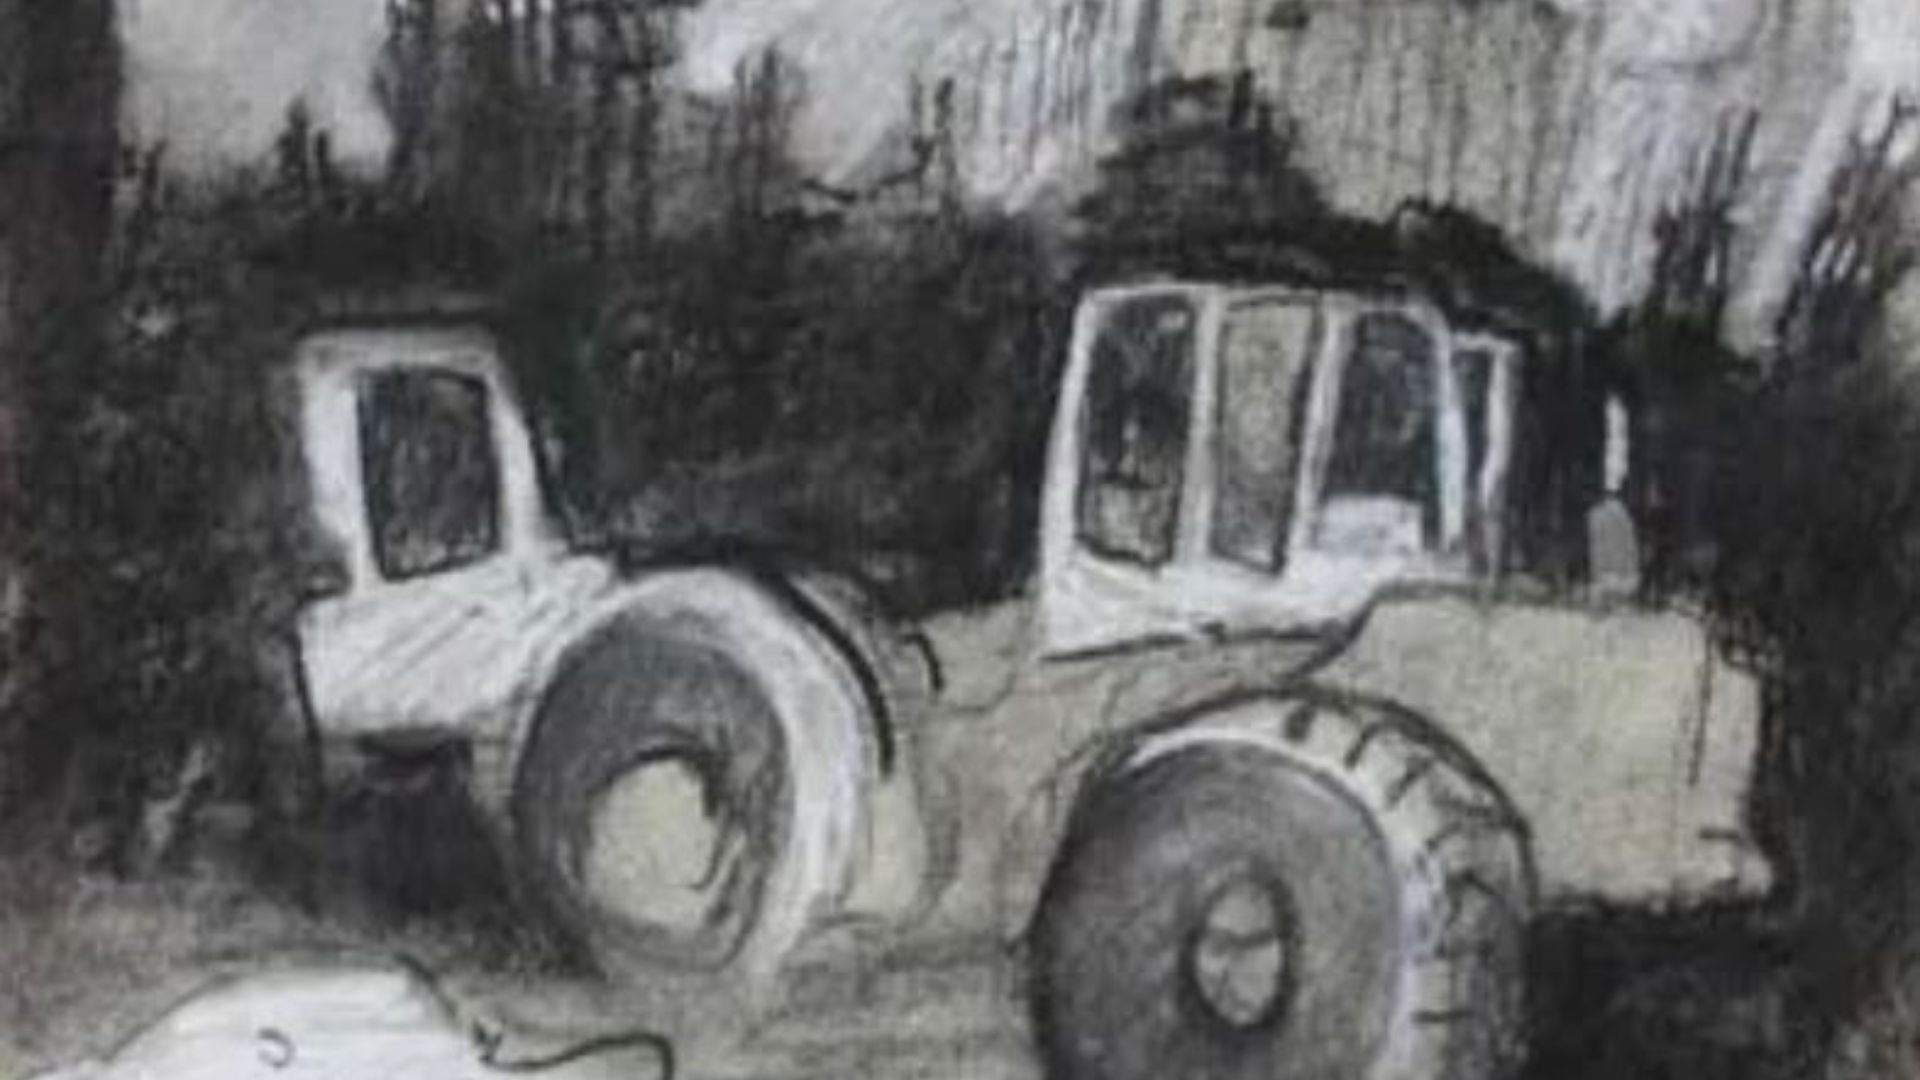 Drawing of a truck at Ground Zero